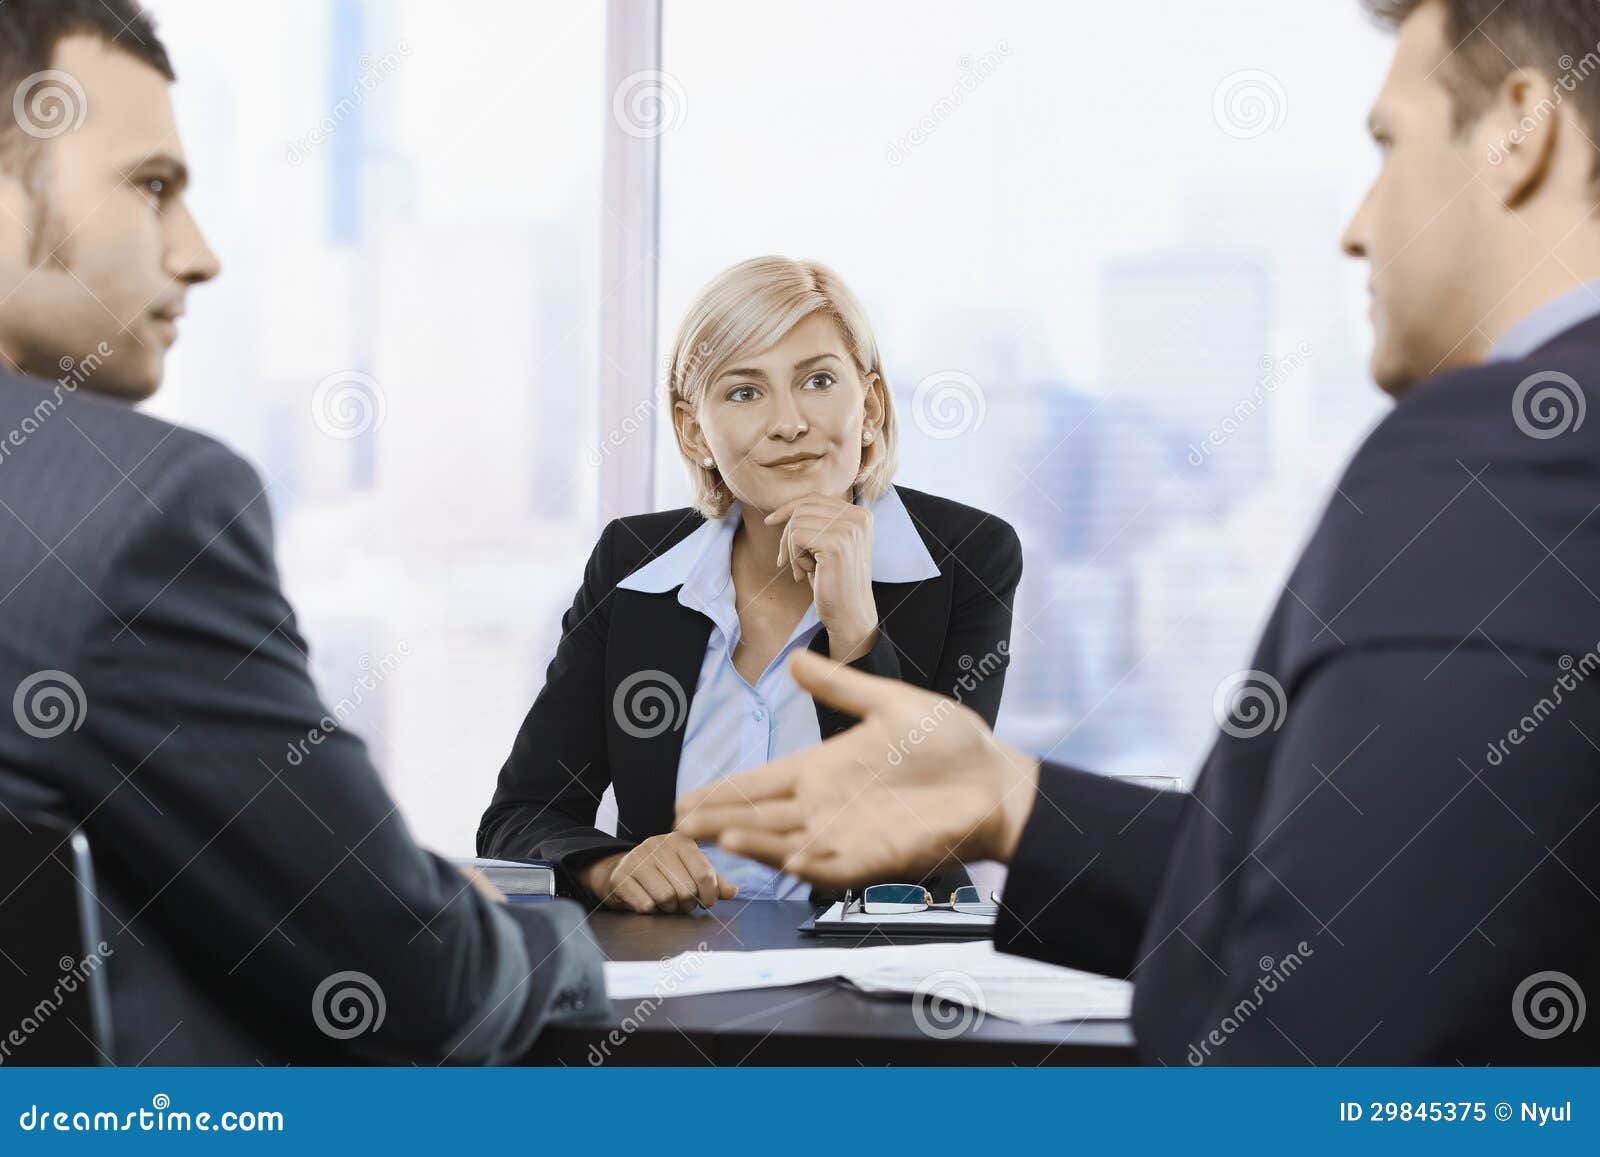 businesswoman concentrating at meeting